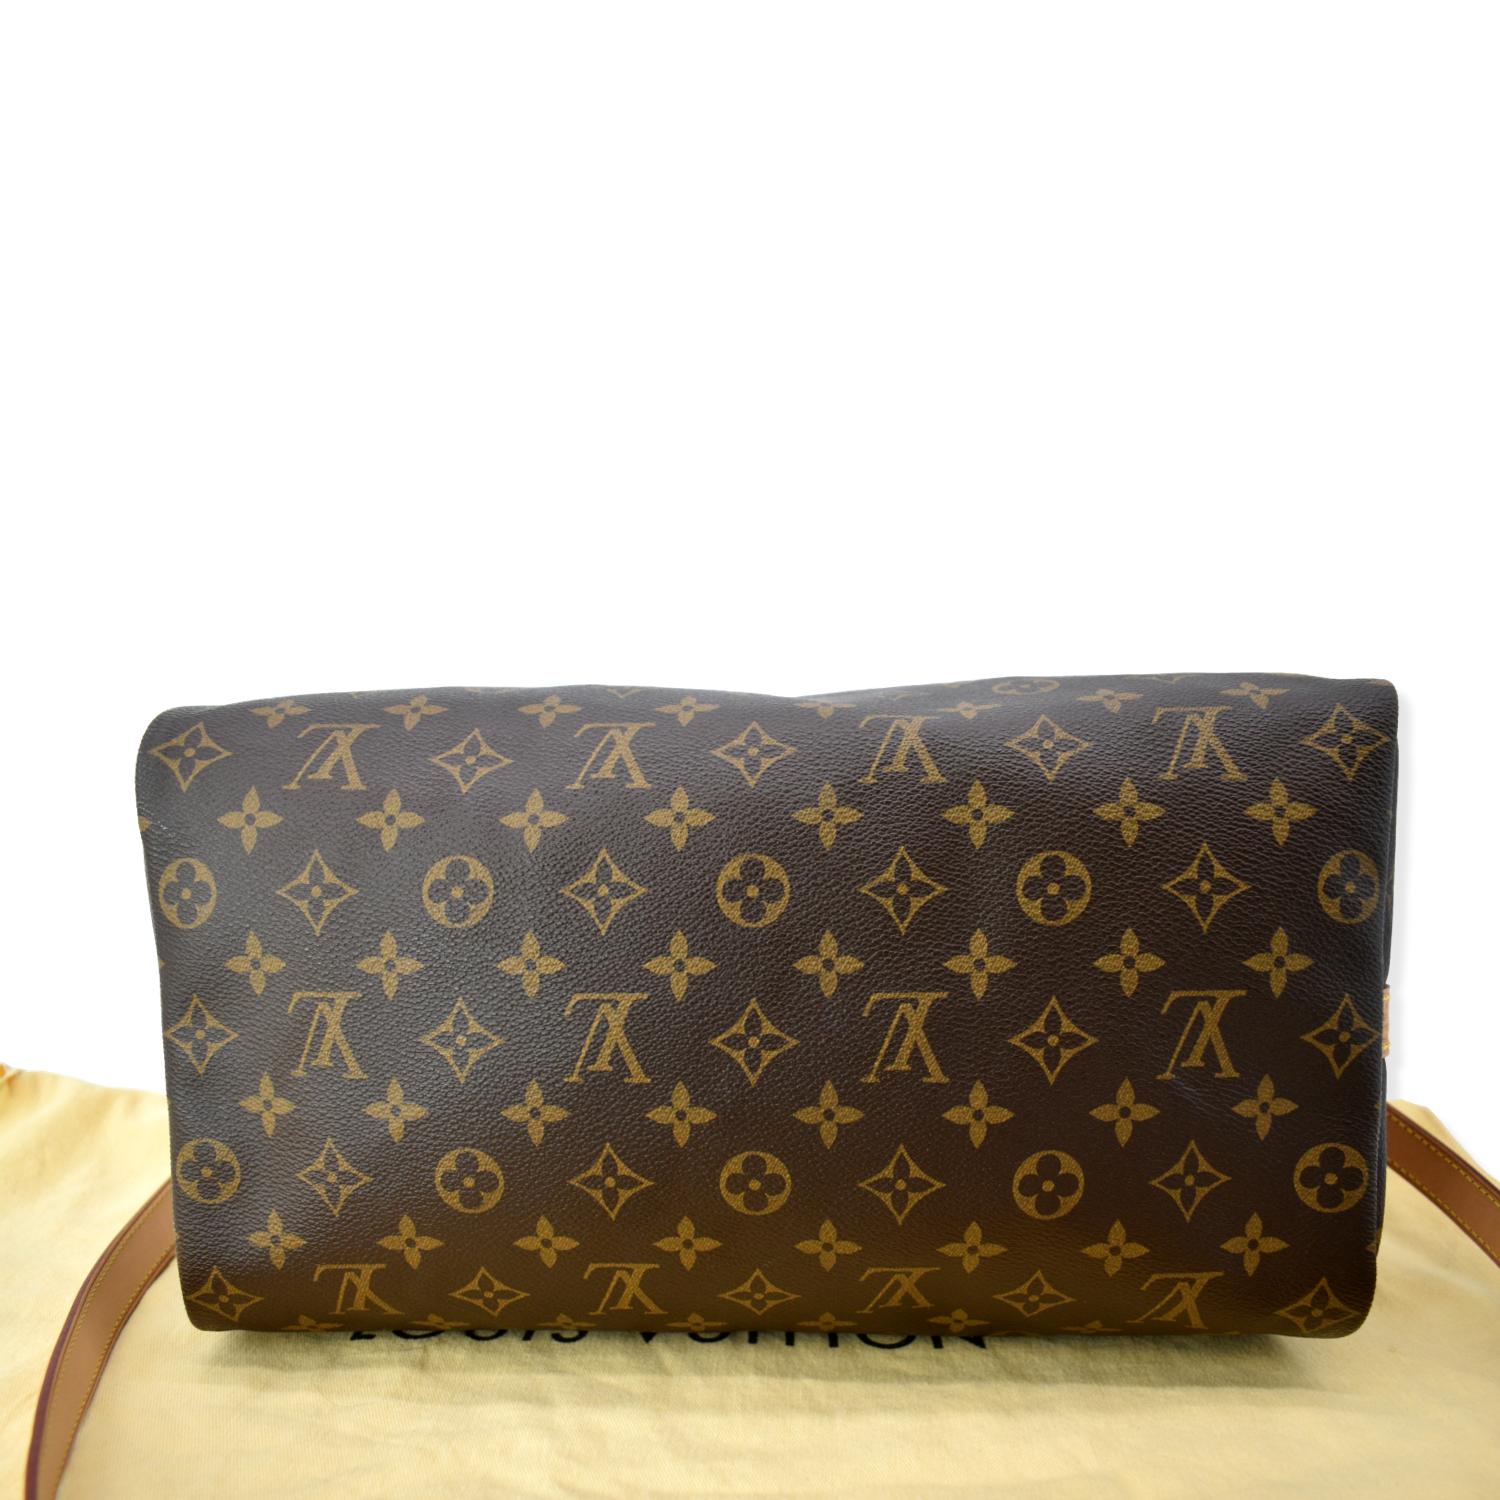 Louis Vuitton Speedy 40 Bandouliere bag and Toiletry pouch 26